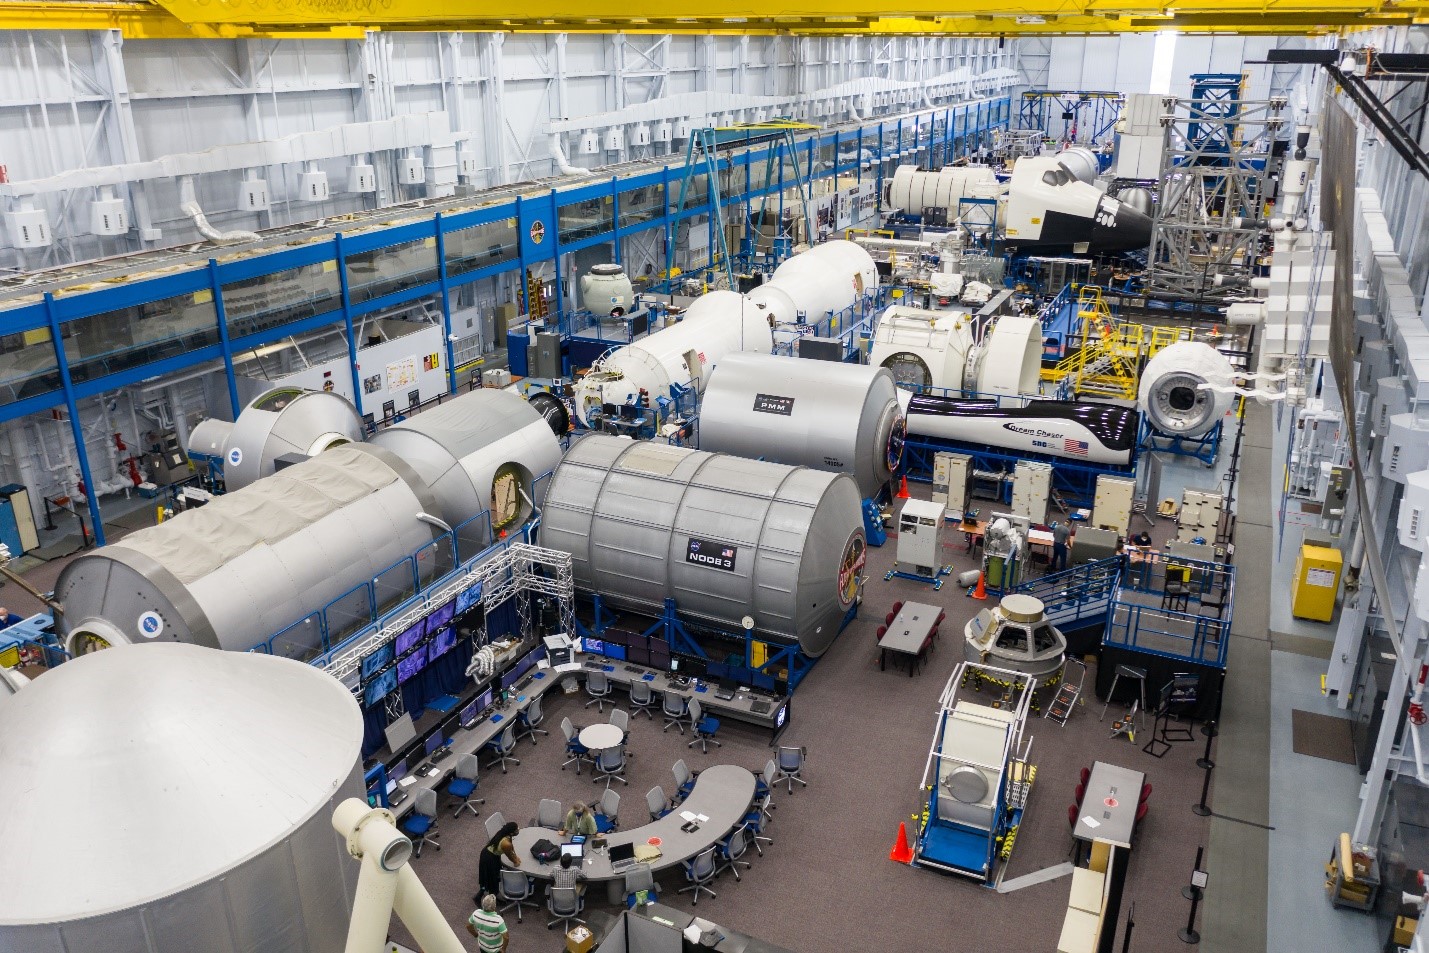 Overview of the Space Vehicle Mockup Facility in Building 9 in September 2020. Credits: NASA